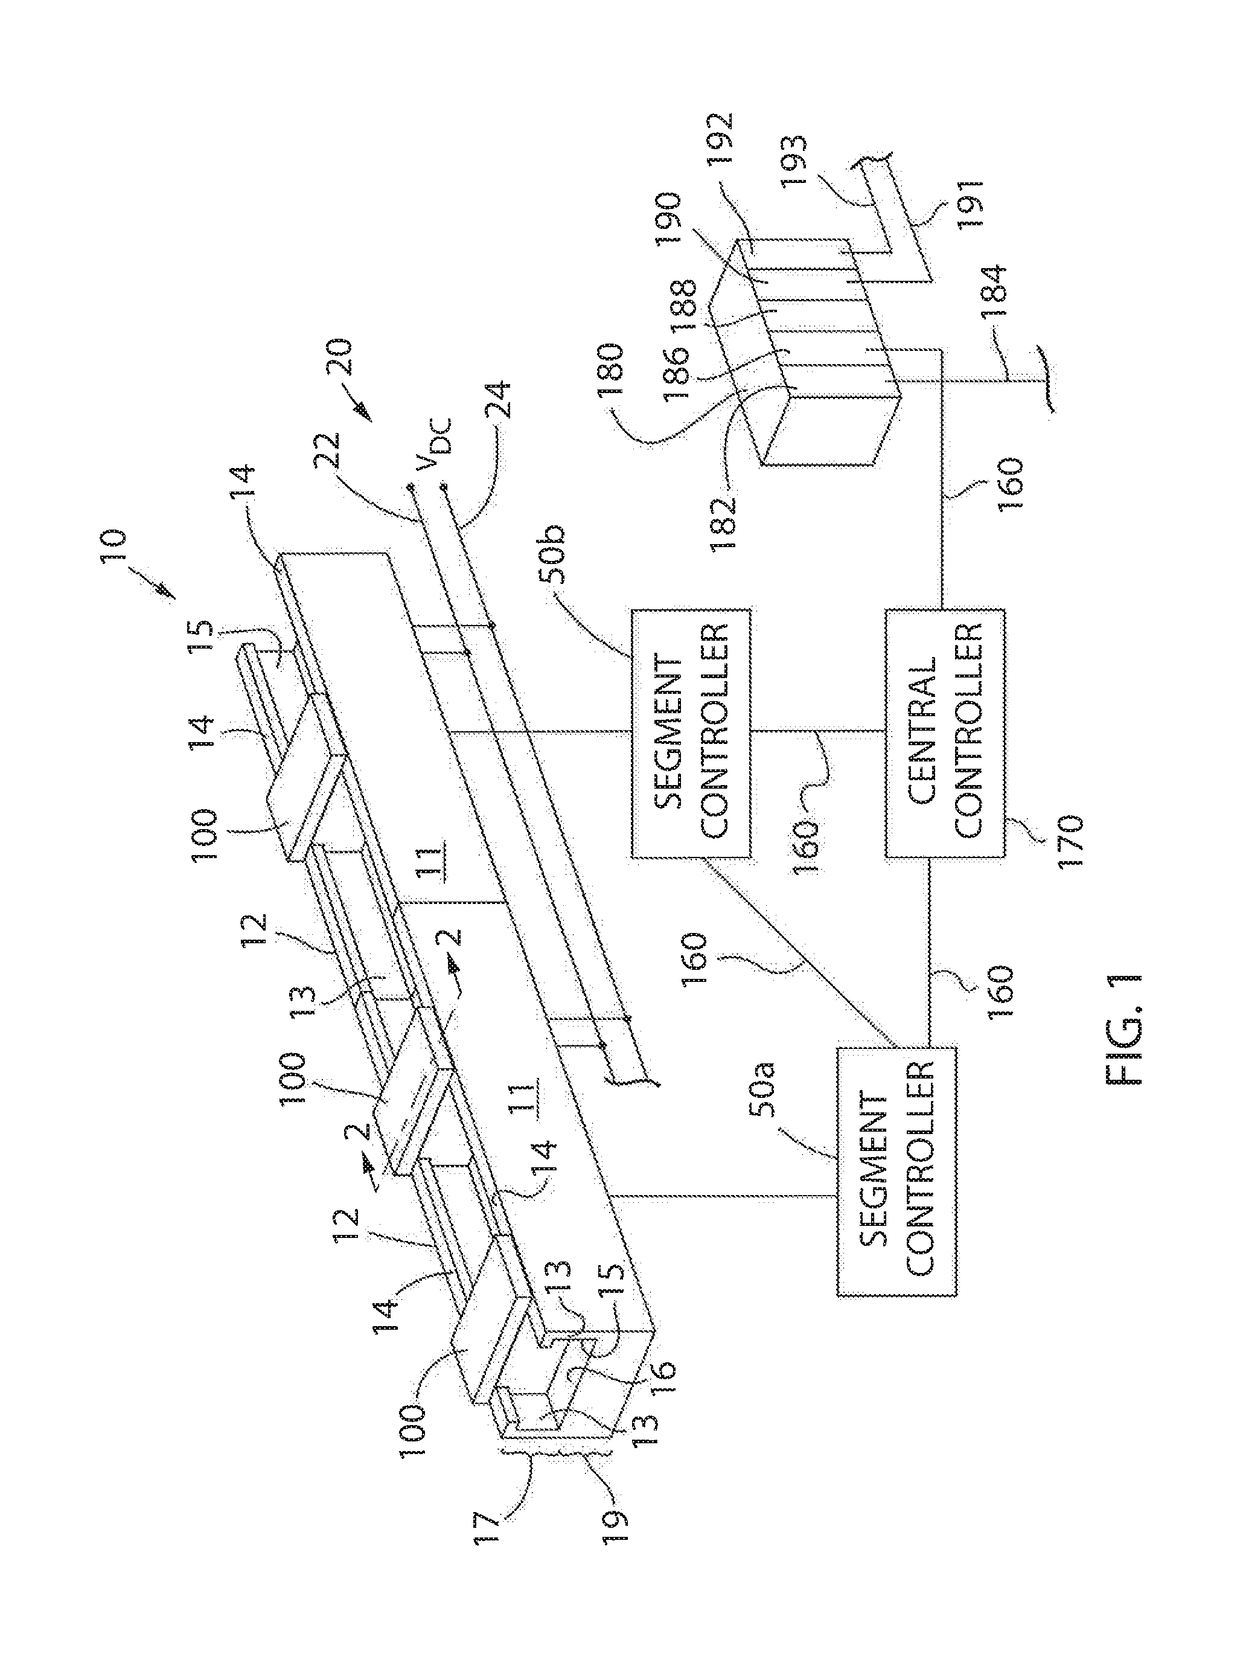 Method and Apparatus to Characterize Loads in a Linear Synchronous Motor System